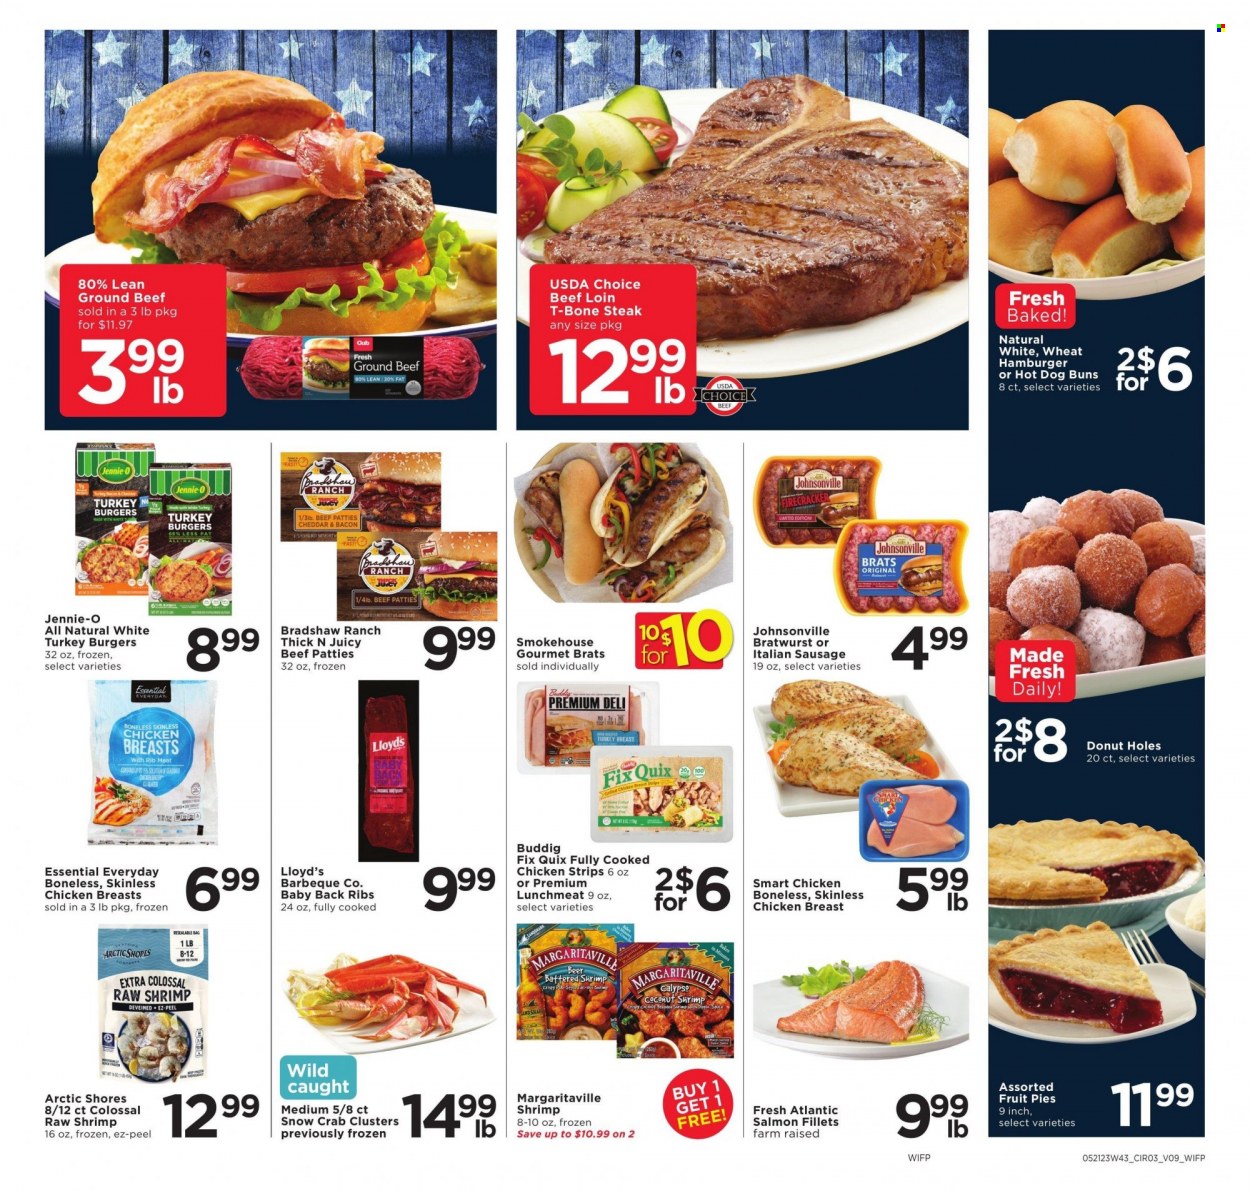 thumbnail - Cub Foods Flyer - 05/24/2023 - 05/30/2023 - Sales products - pie, buns, donut holes, salmon, salmon fillet, crab, shrimps, Arctic Shores, crab clusters, Johnsonville, bratwurst, italian sausage, lunch meat, cheese, strips, chicken strips, alcohol, beer, turkey breast, chicken breasts, chicken, turkey, ground beef, t-bone steak, steak, ribs, turkey burger, pork meat, pork ribs, pork back ribs, bag. Page 4.